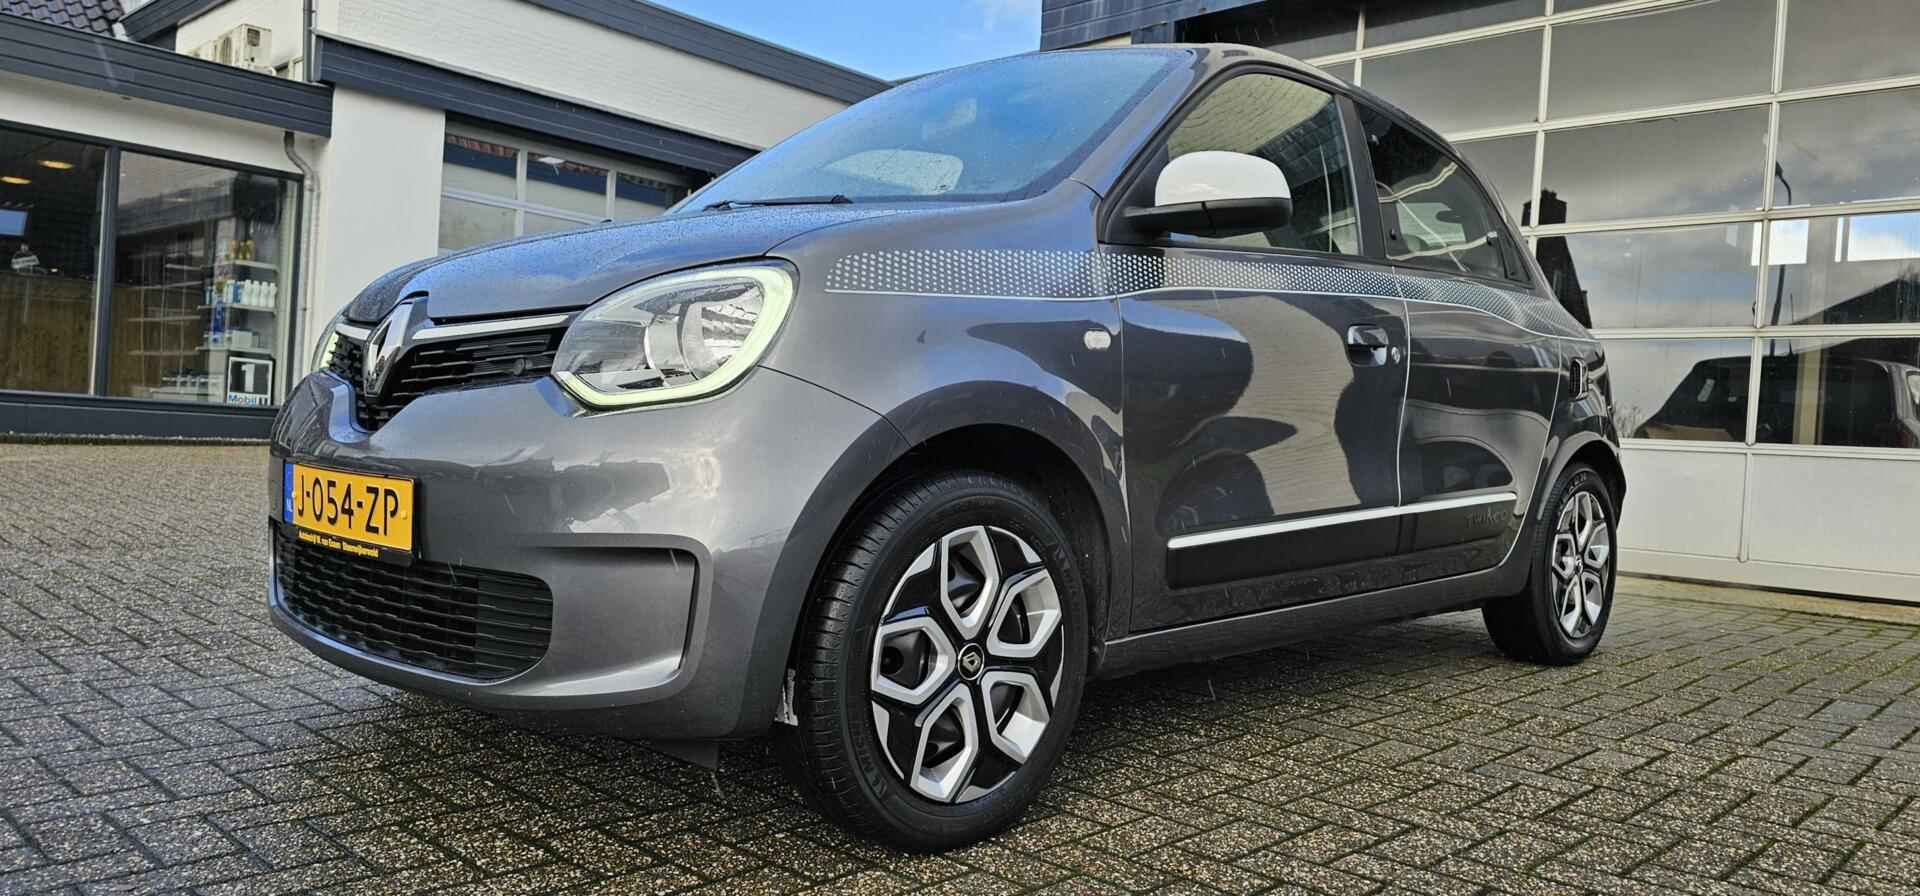 Renault Twingo 1.0 SCe 75pk Collection - 9/27